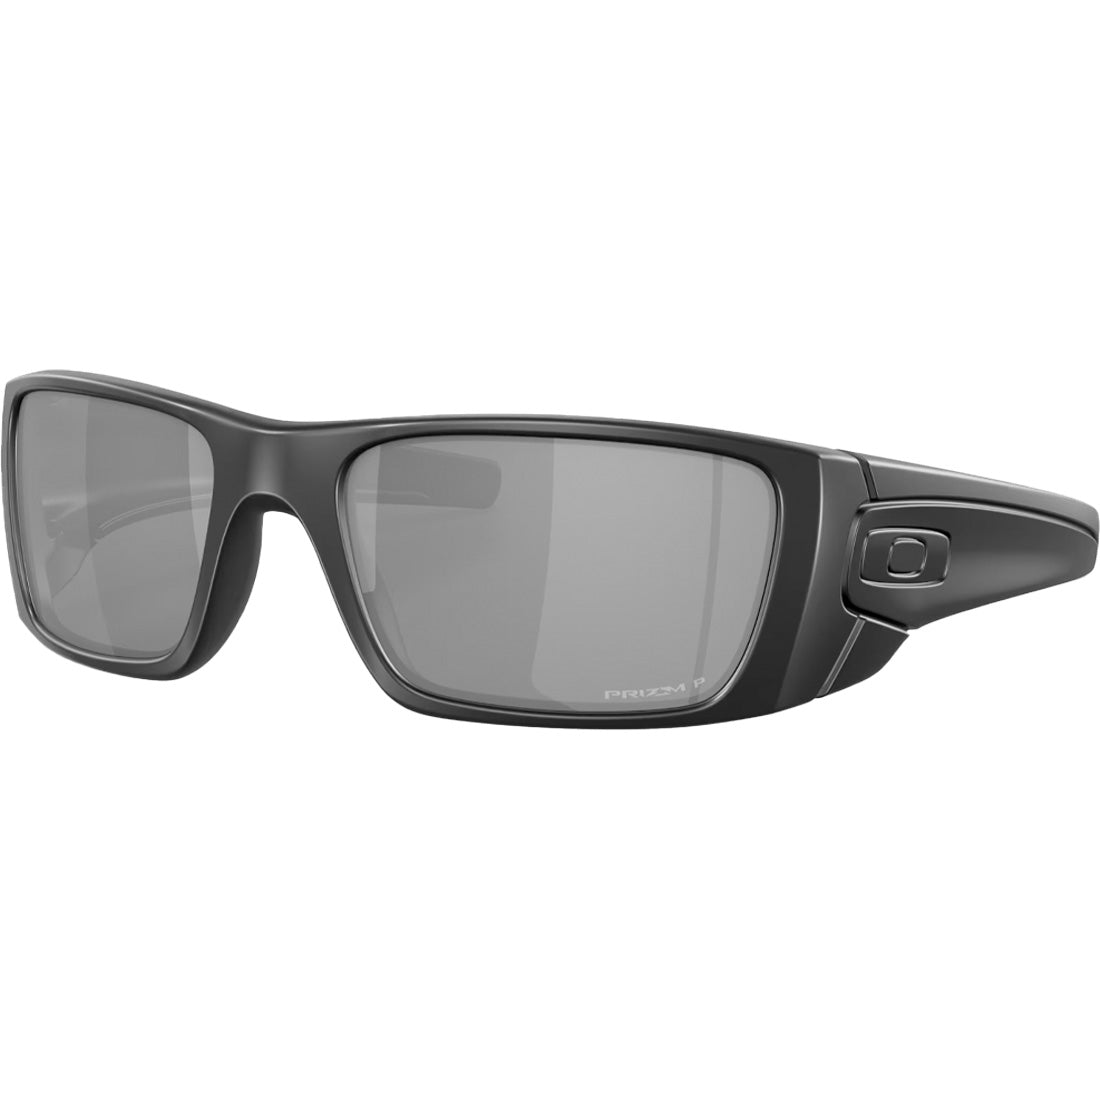 Oakley SI Fuel Cell Blackside Collection